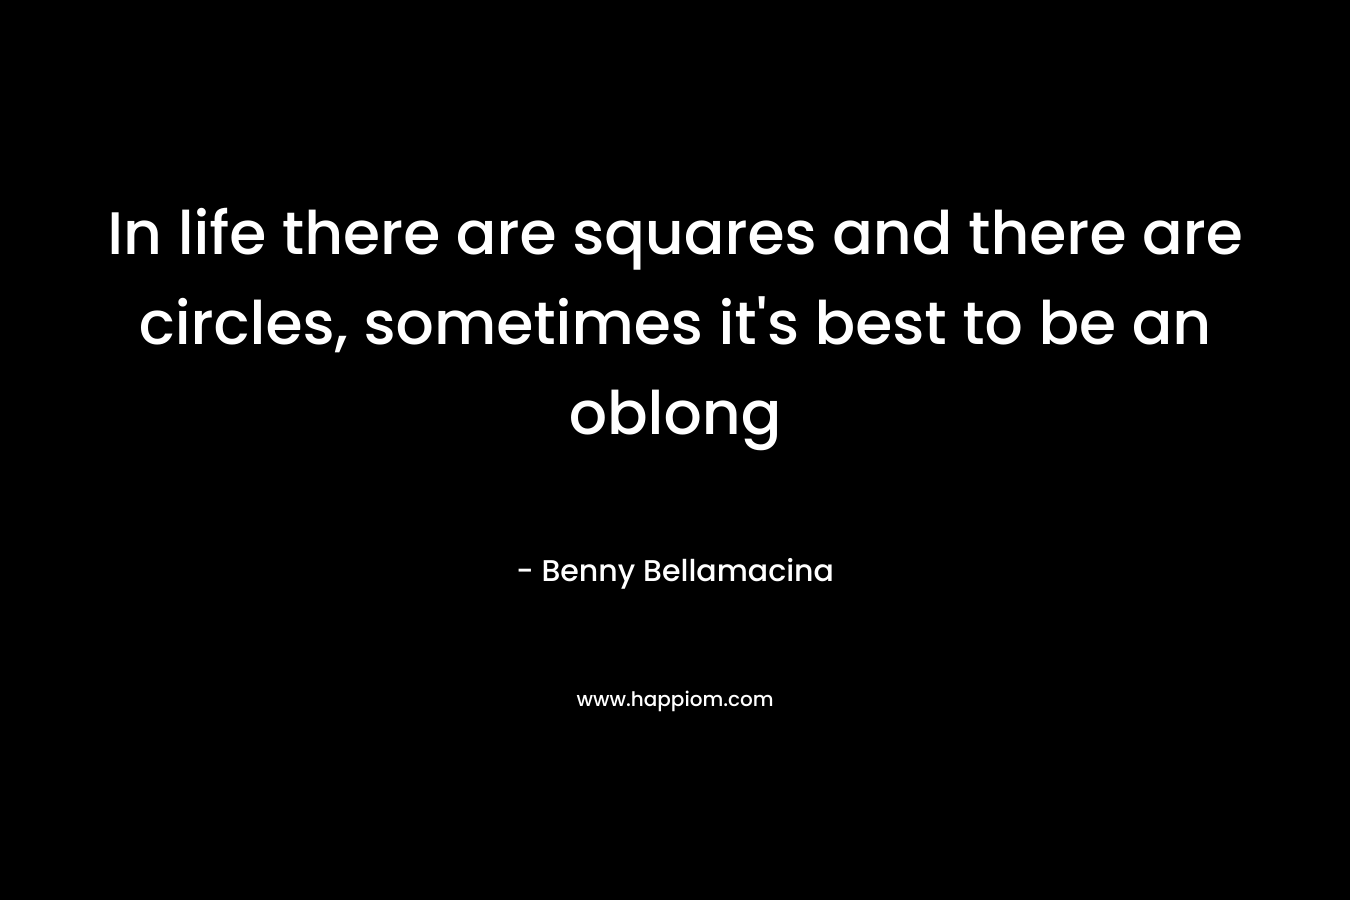 In life there are squares and there are circles, sometimes it’s best to be an oblong – Benny Bellamacina